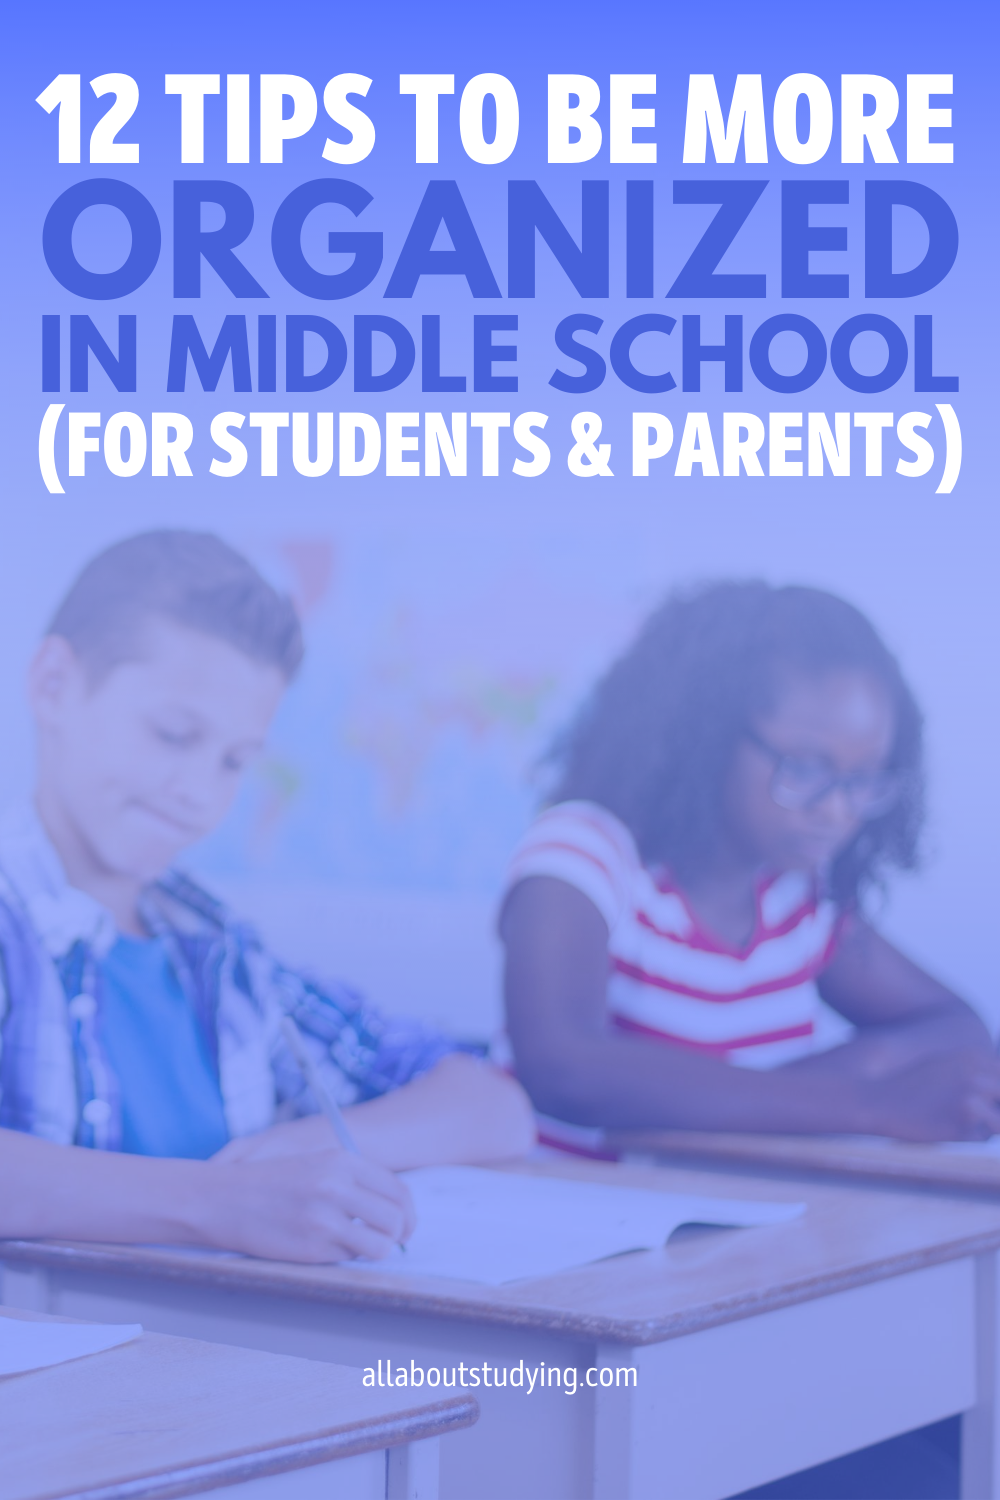 Tips To Be More Organized In Middle School (For Students and Parents), Organization advice for kids 